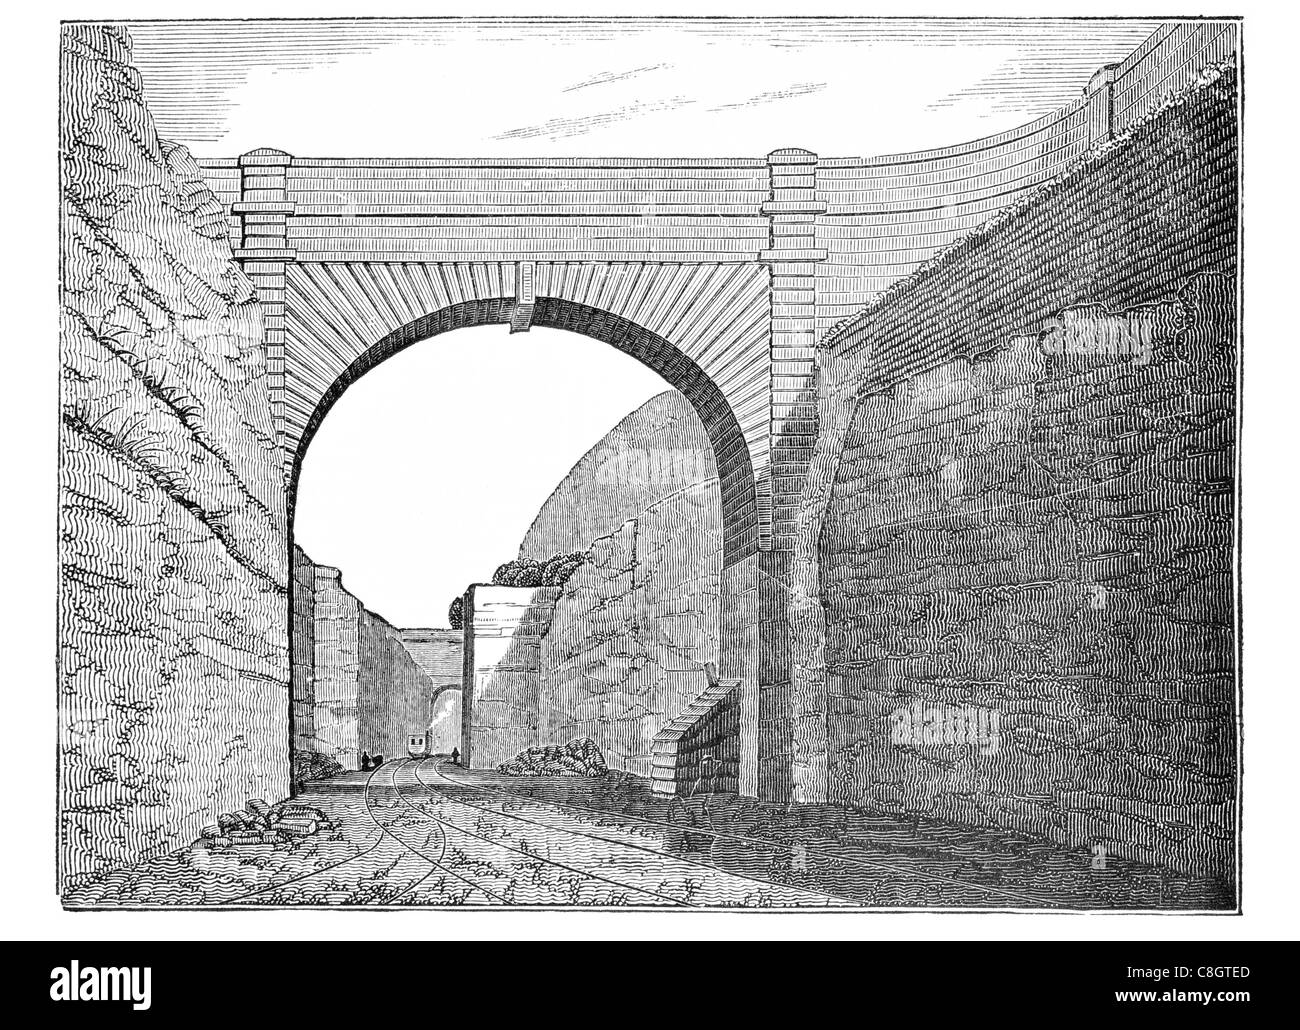 Olive Mount cutting Liverpool and Manchester Railway Steam Locomotive construction excavation excavated bridge arch Stock Photo